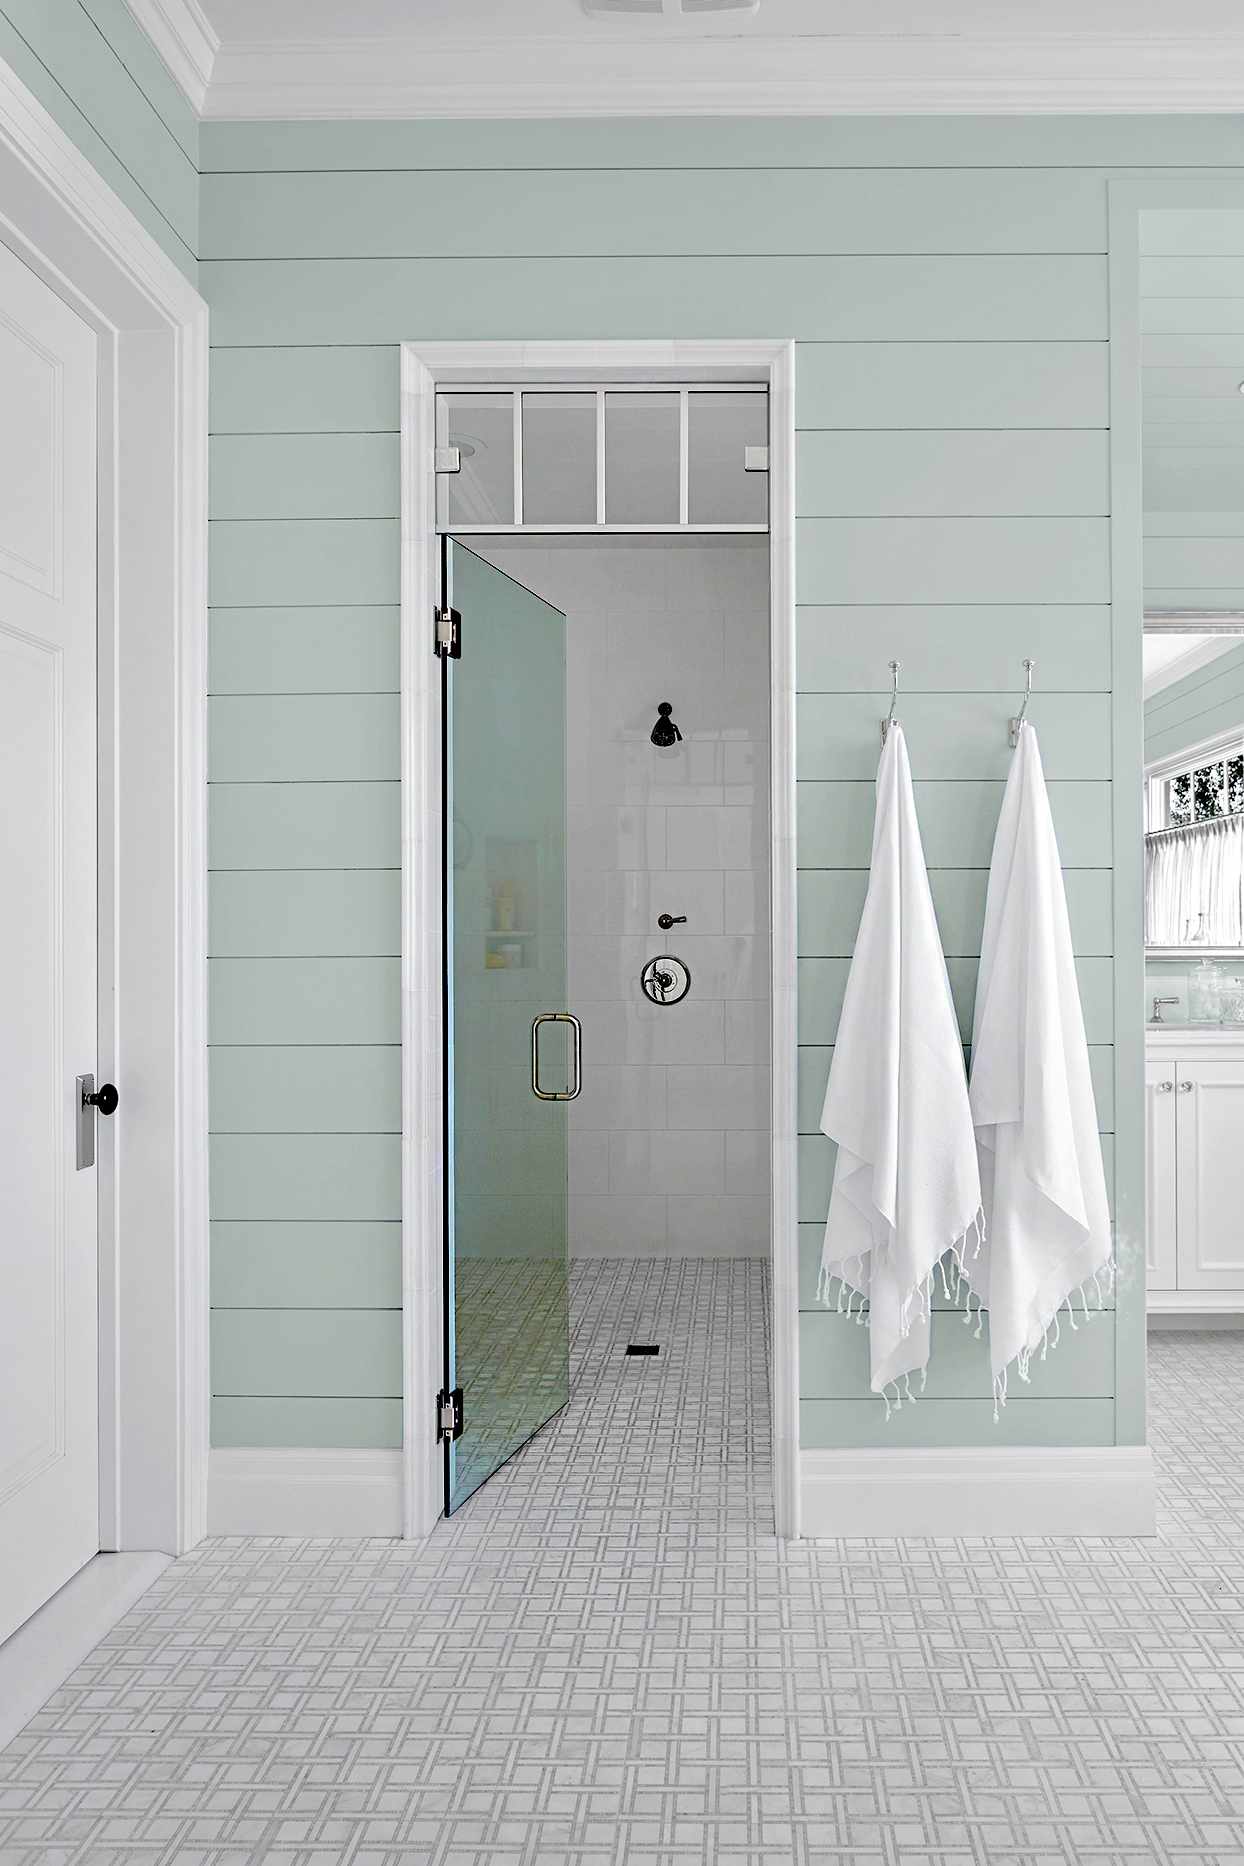 Bathroom with light blue walls and hanging white towels